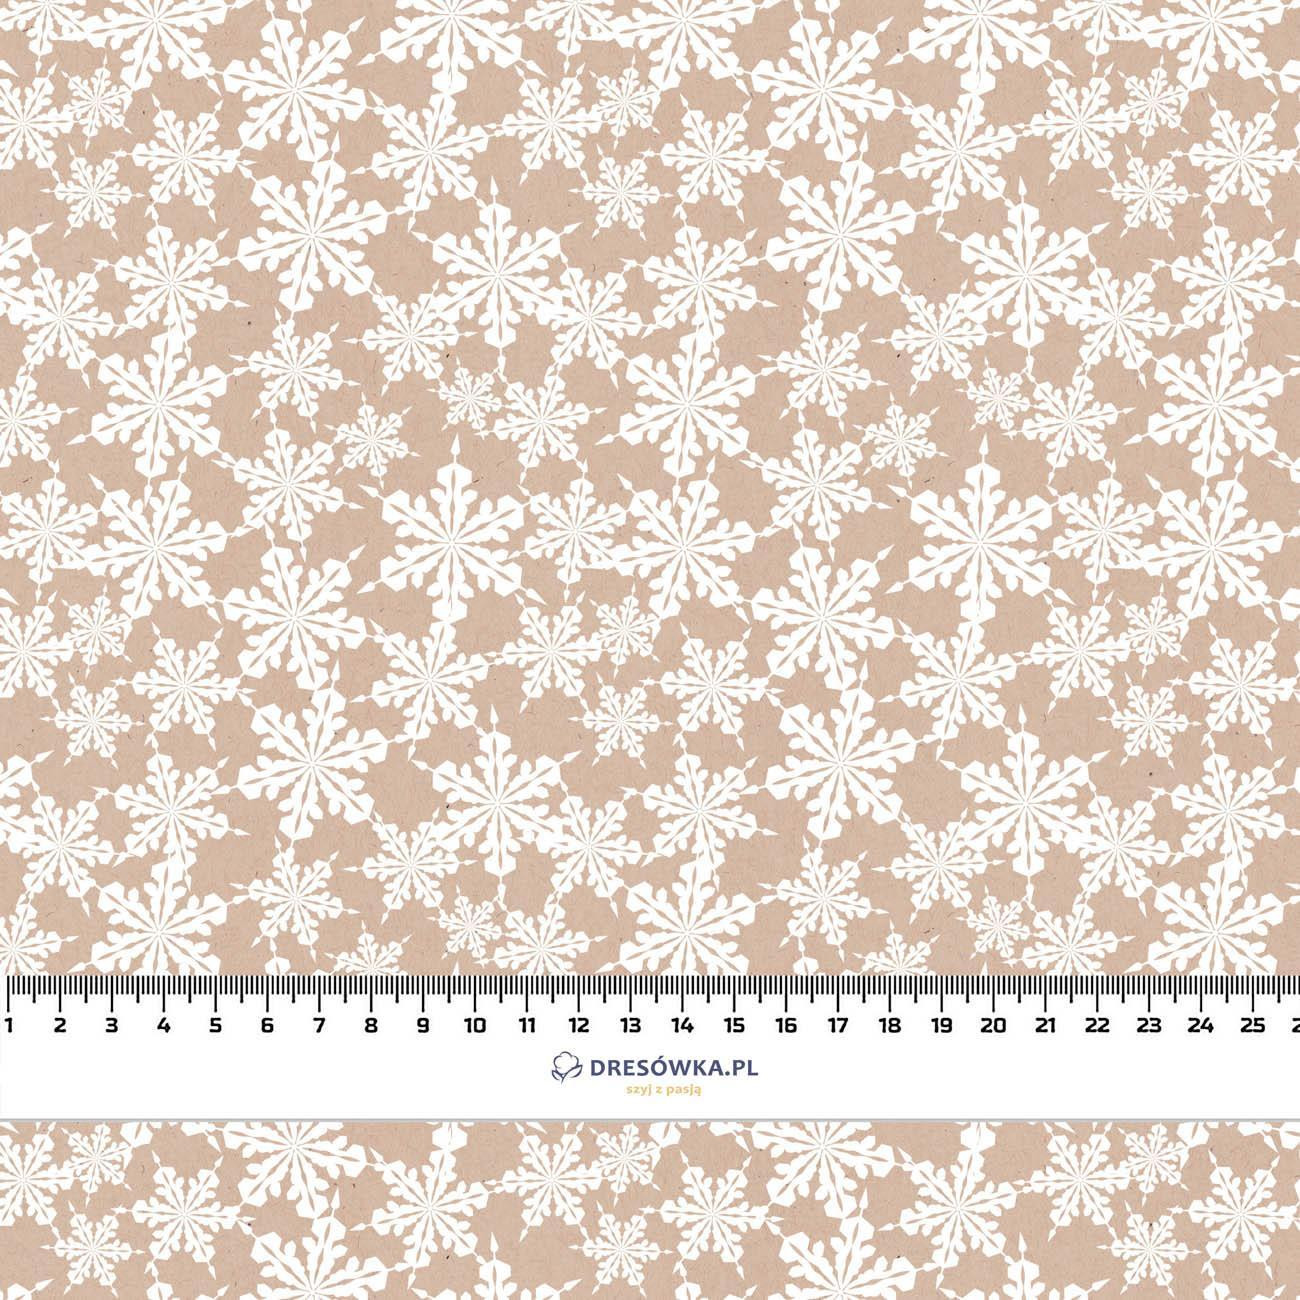 PAPER SNOWFLAKES (WHITE CHRISTMAS) - light brushed knitwear